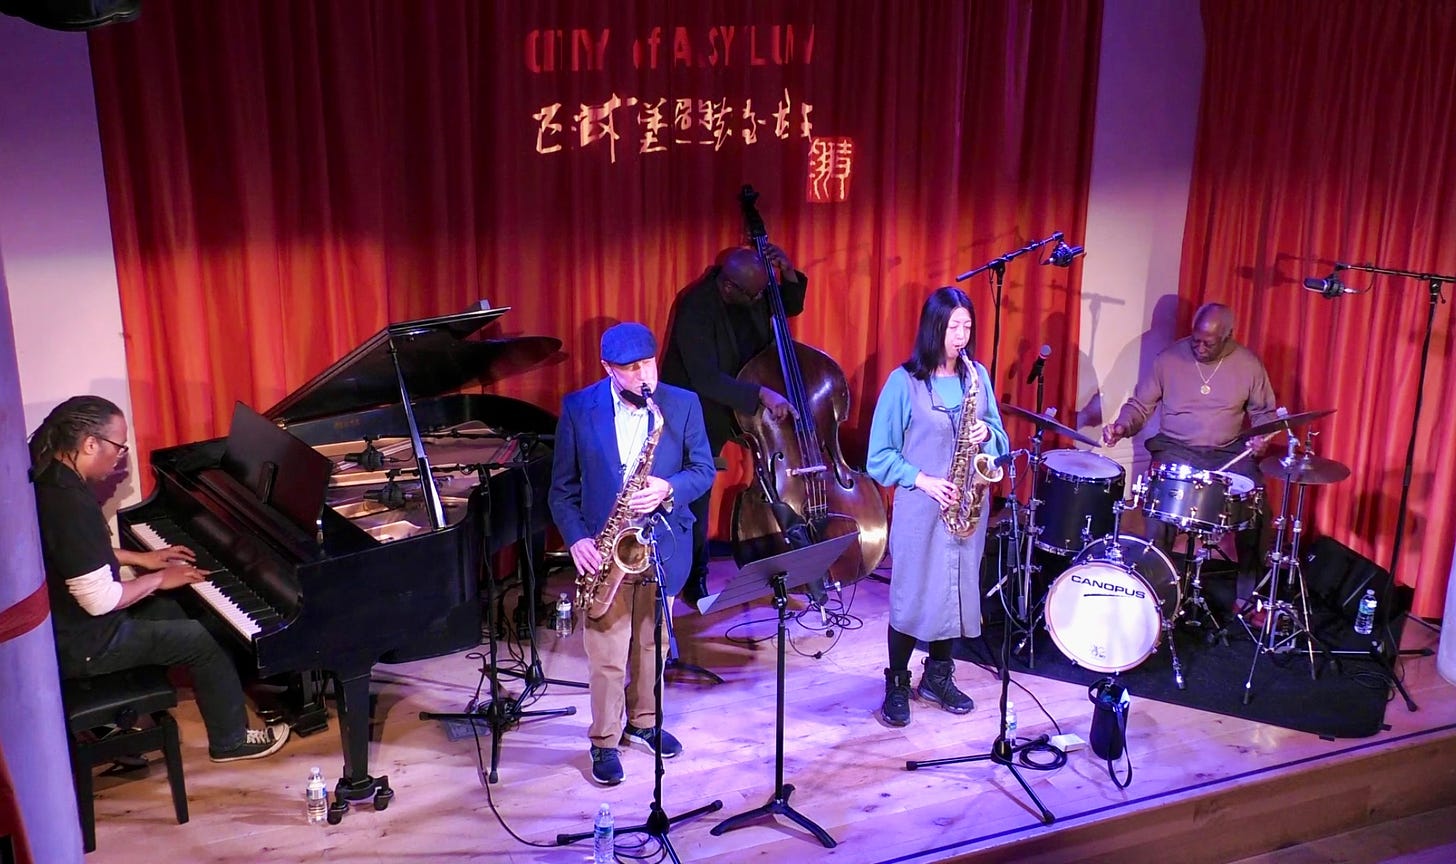 Image of a five-piece jazz band playing live. There is a drummer, two saxophone players (tenor and alto), a pianist, and an upright bass player.